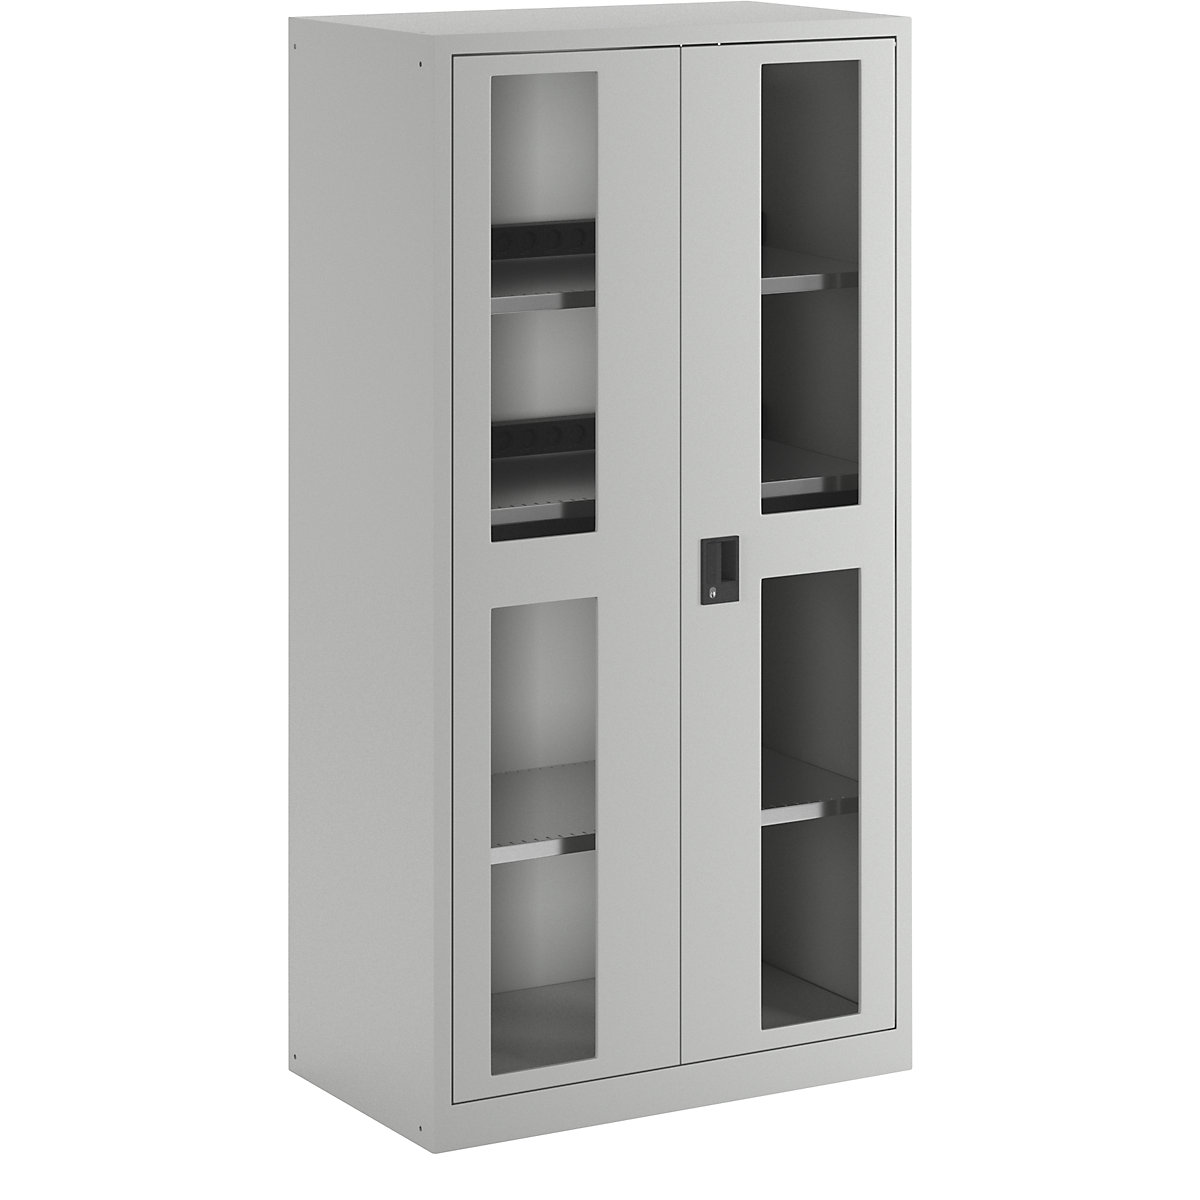 Battery charging cabinet – LISTA, 3 shelves, 2 drawers, vision panel doors, grey-7